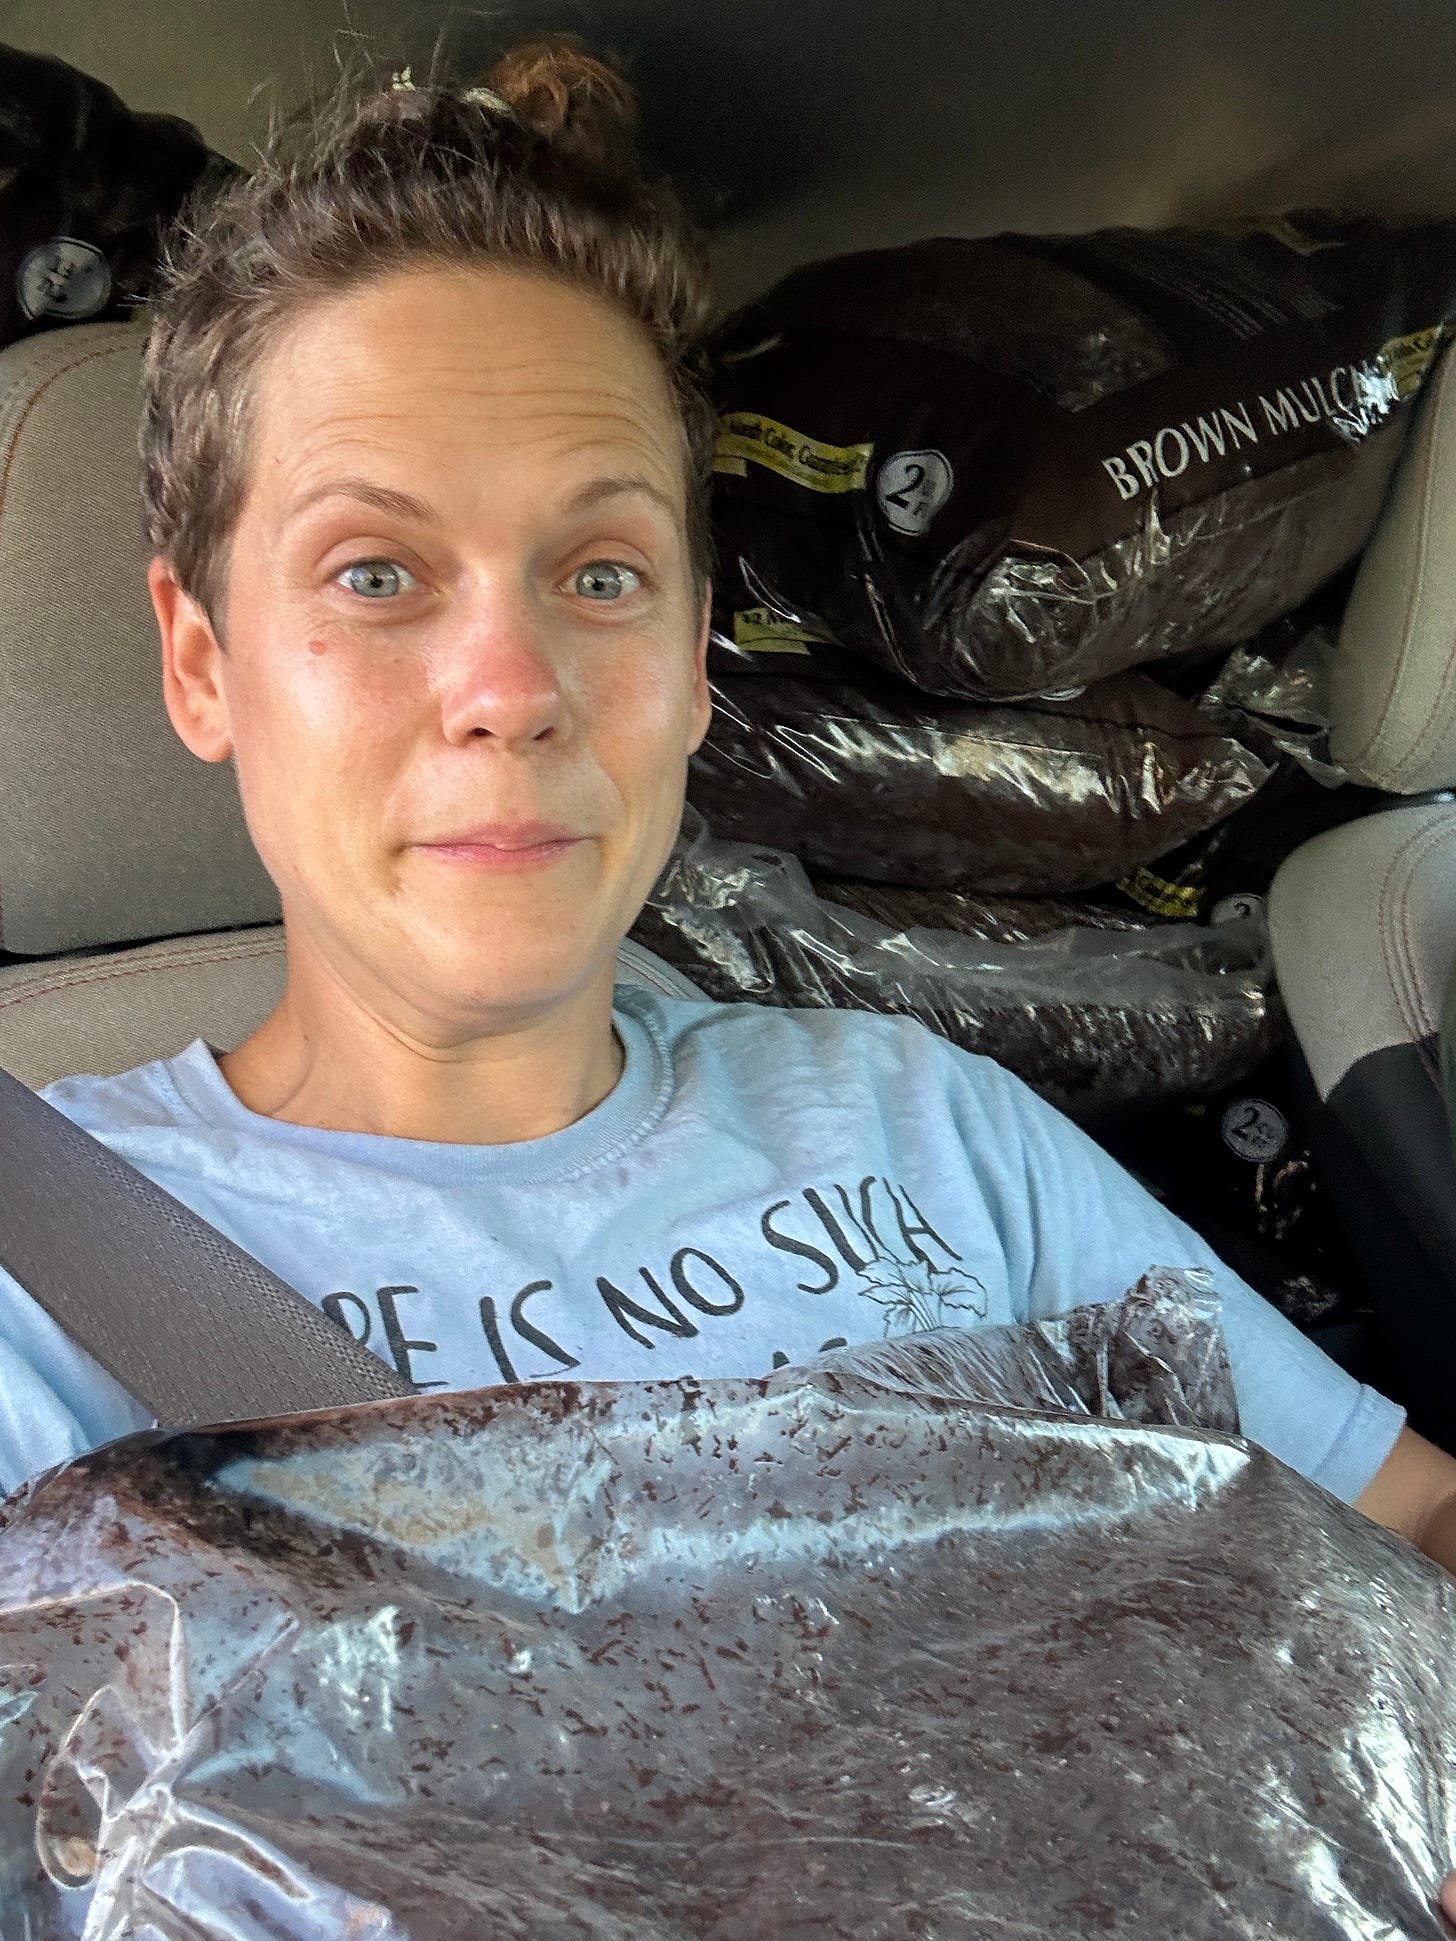  a girl making a silly face in a car packed with mulch behind her and a bag of mulch in her lap